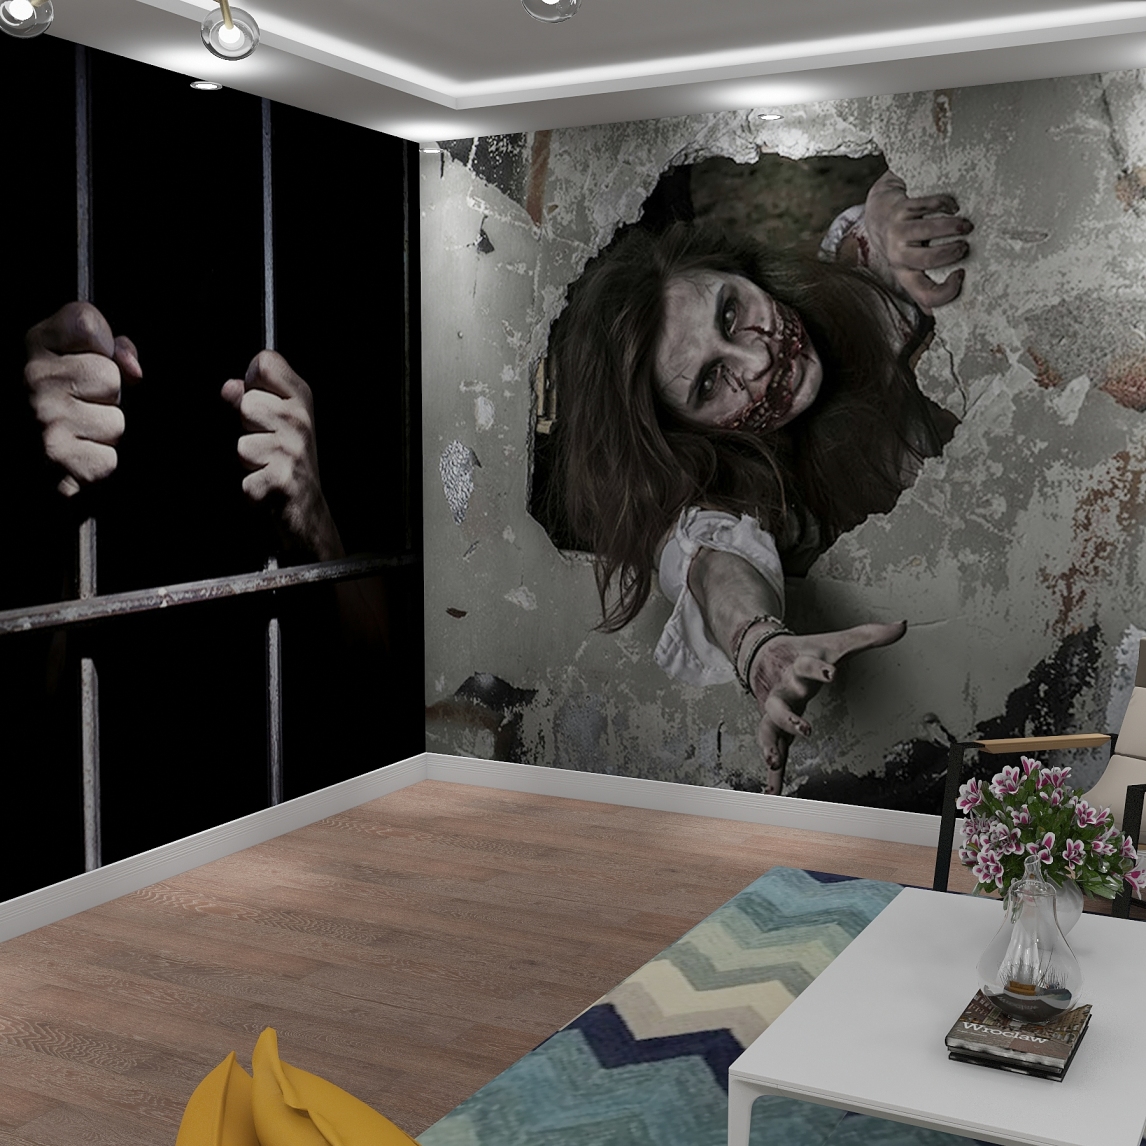 This New Gory Escape Room Has Opened For Halloween In Leeds - The Yorkshireman